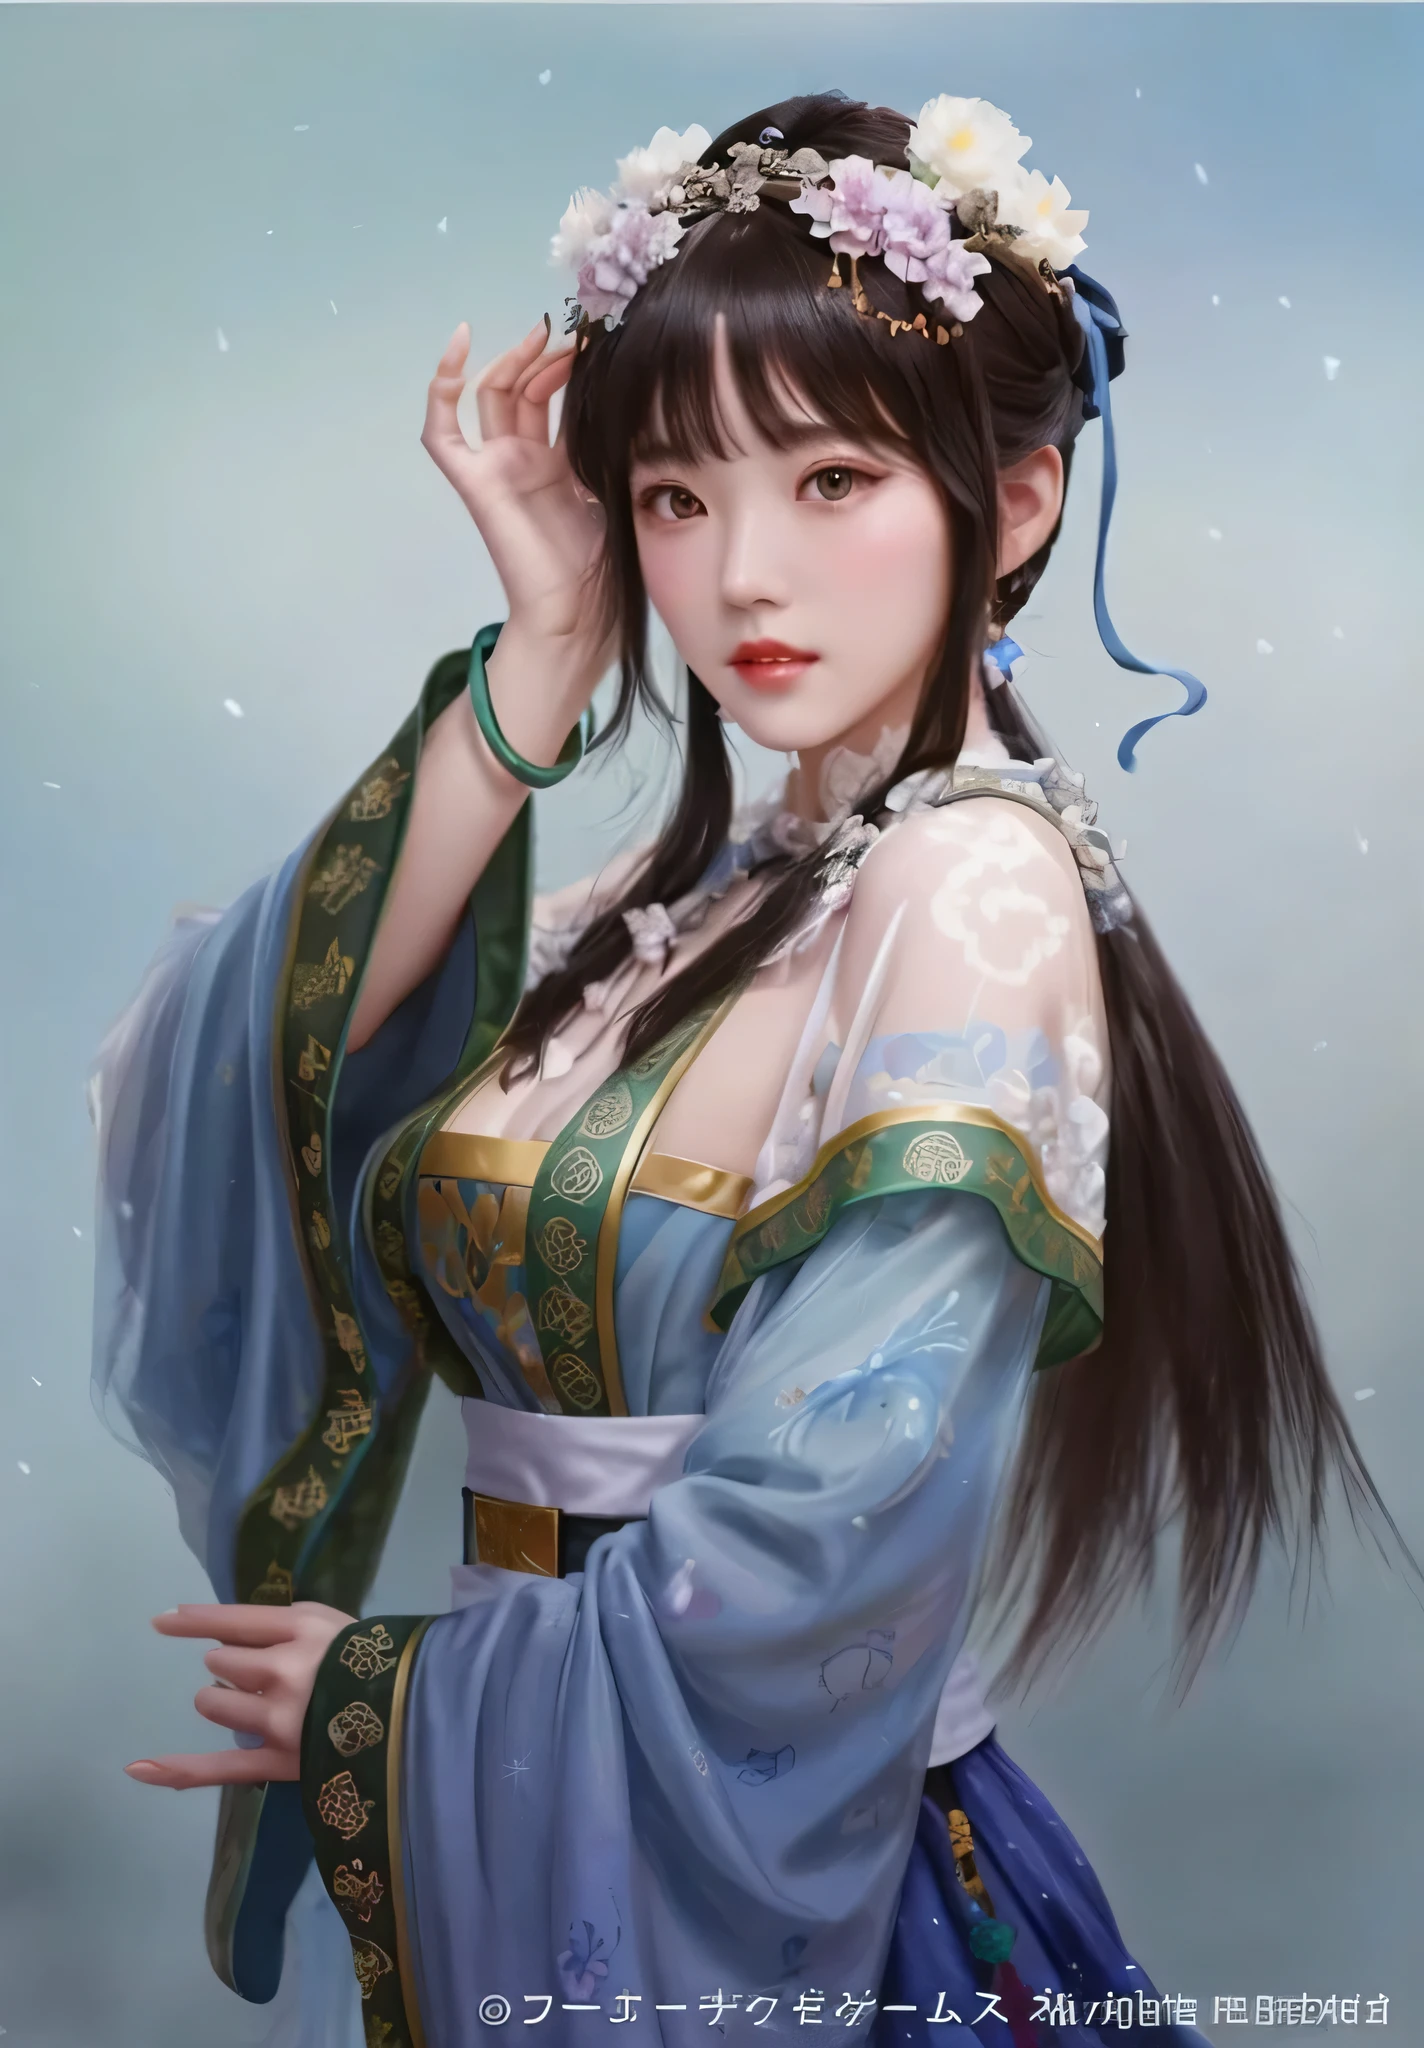 human development report,ultra high definition,8K,Very detailed,best quality,masterpiece,simple background,One dressed in blue、a woman with a flower crown on her head, beautiful figure painting, palace ， Girl Wearing Hanfu, beautiful fantasy queen, ancient chinese princess, Wearing Hanfu, Beautiful digital artwork, Inspired by Lan Ying, inspired by Fenghua Zhong, Gurwitz style artwork, inspired by trees, Chinese girl